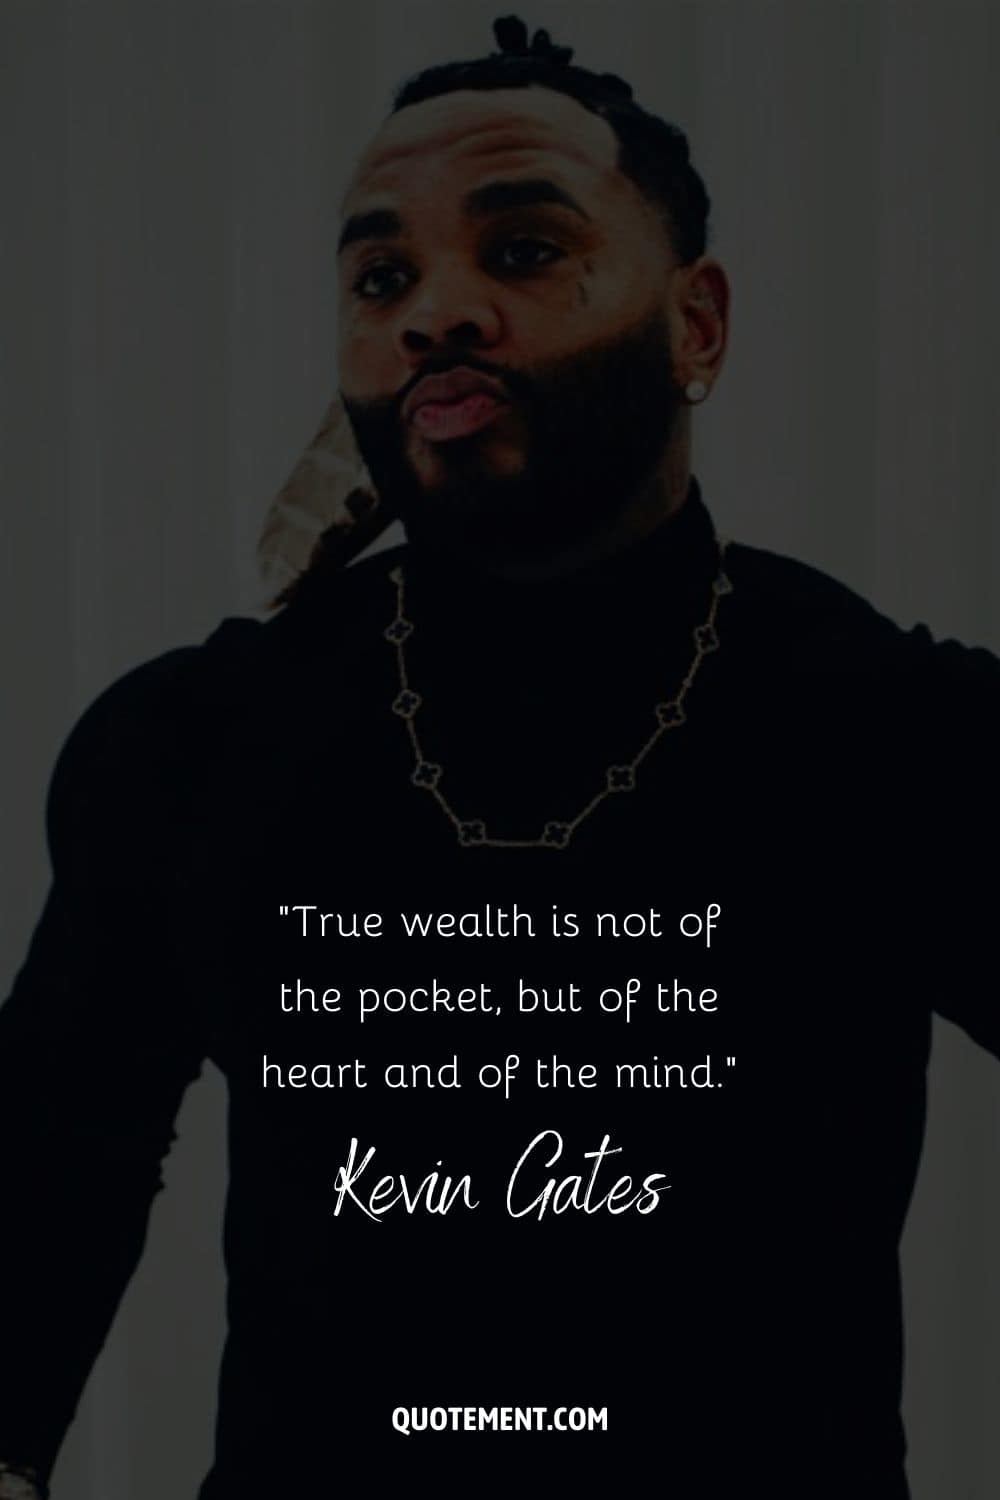 “True wealth is not of the pocket, but of the heart and of the mind.” – Kevin Gates